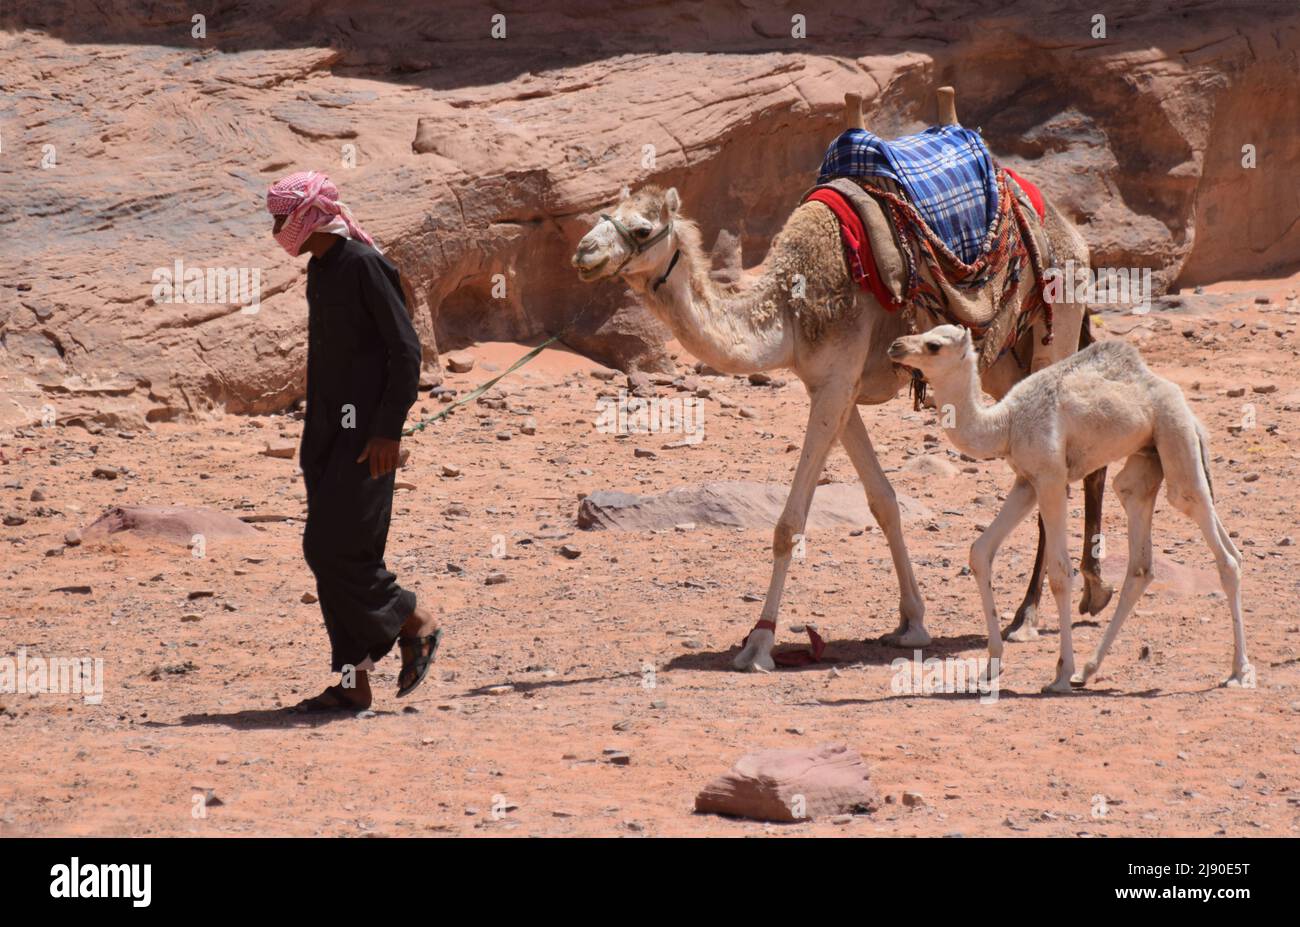 A bedouin man leading an adult and a baby camel through the rocky terrain of Wadi Rum in Jordan Stock Photo